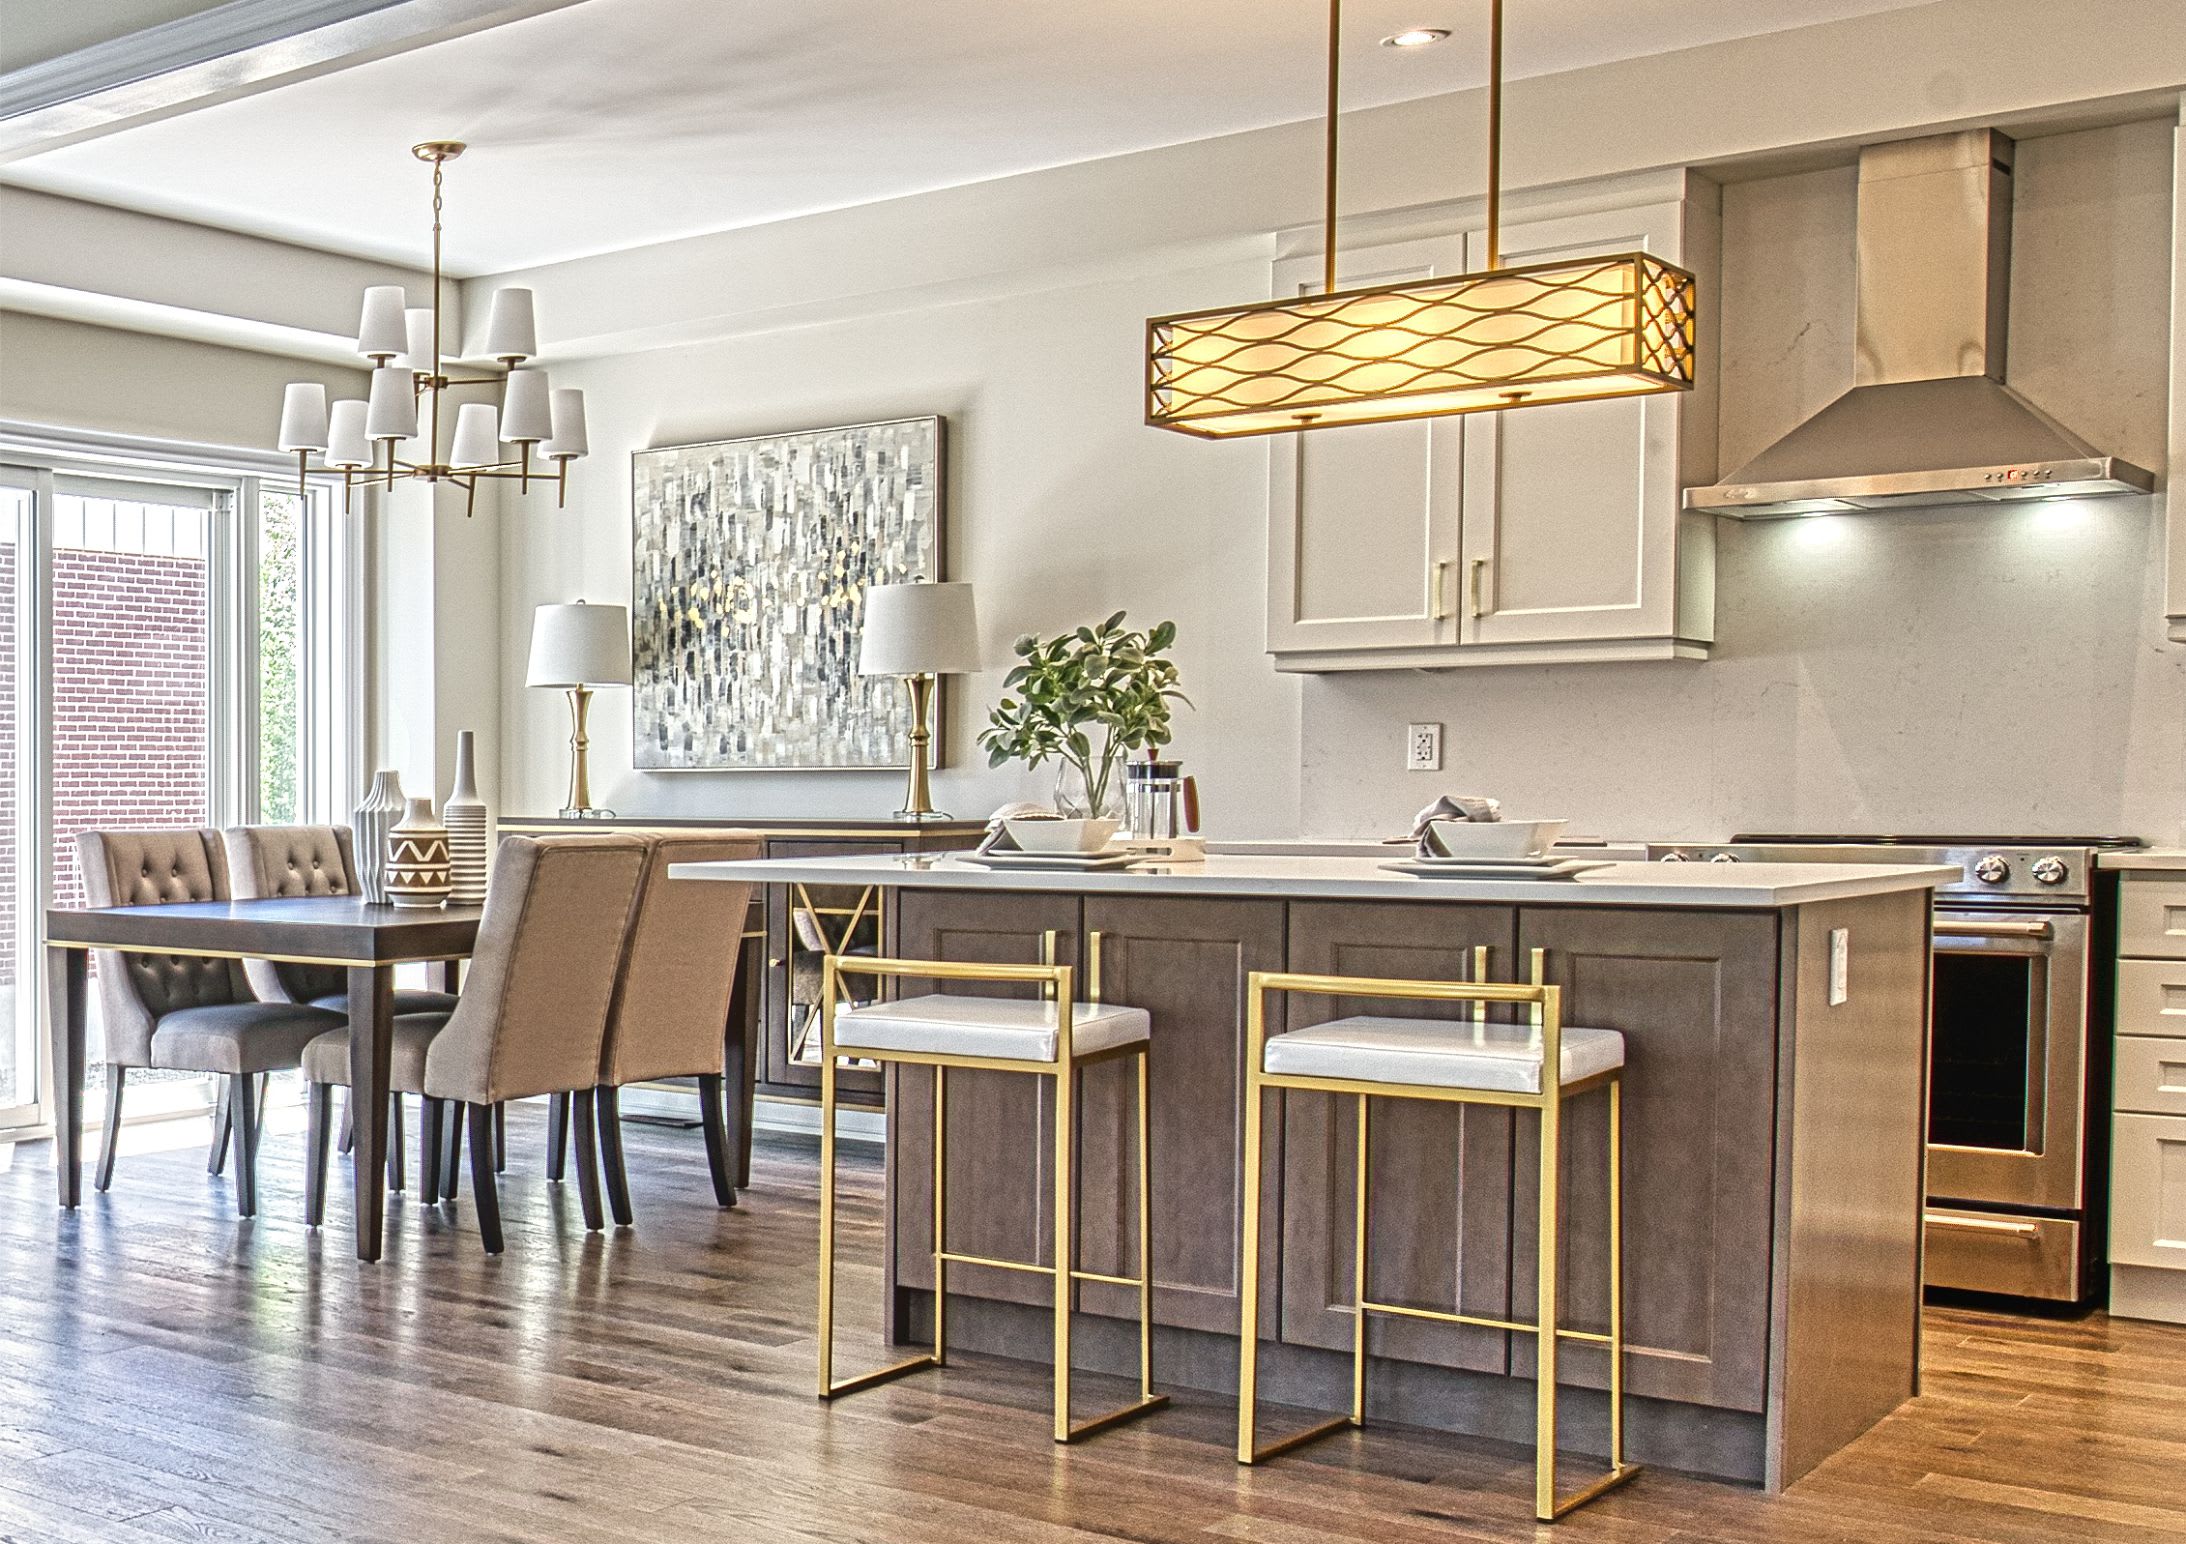 luxury lighting in the kitchen and dining room